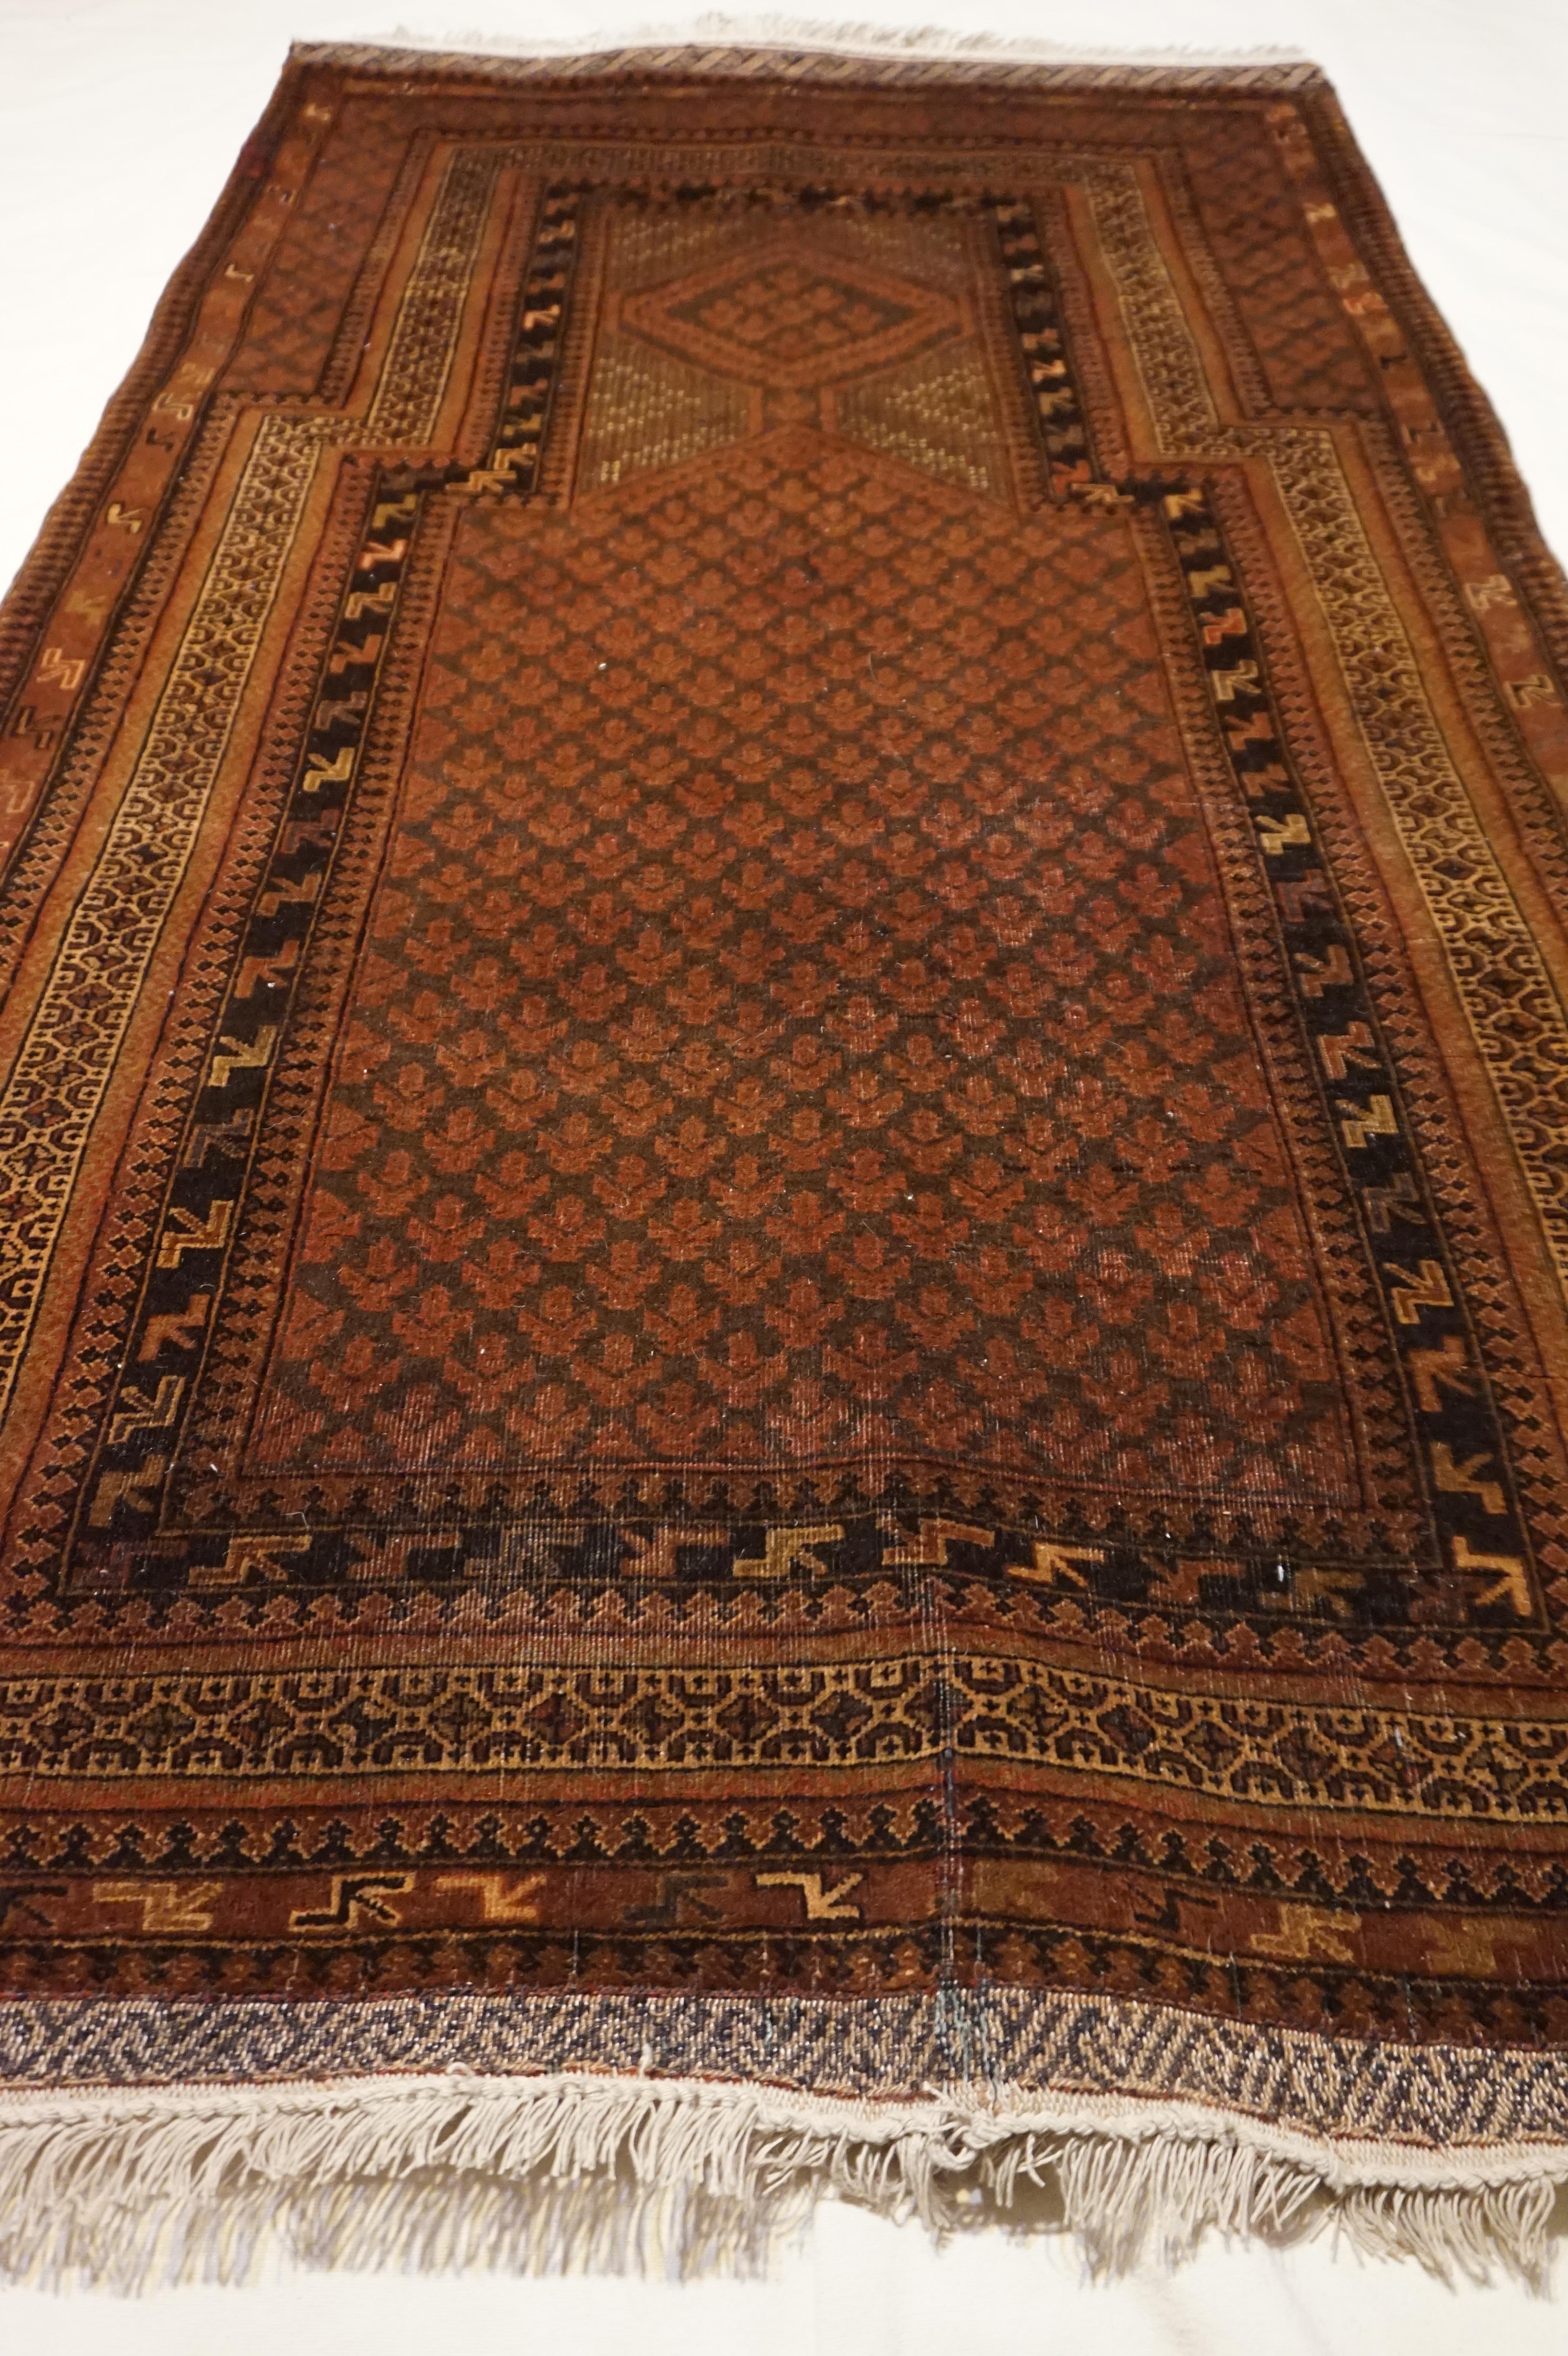 Subtle and rich earthy tones dictate this masterfully hand knotted Afghan prayer rug. The primary image is more indicative of the natural appearance of this rug. Meticulous details adorn all the way down to the fringe which is woven like a